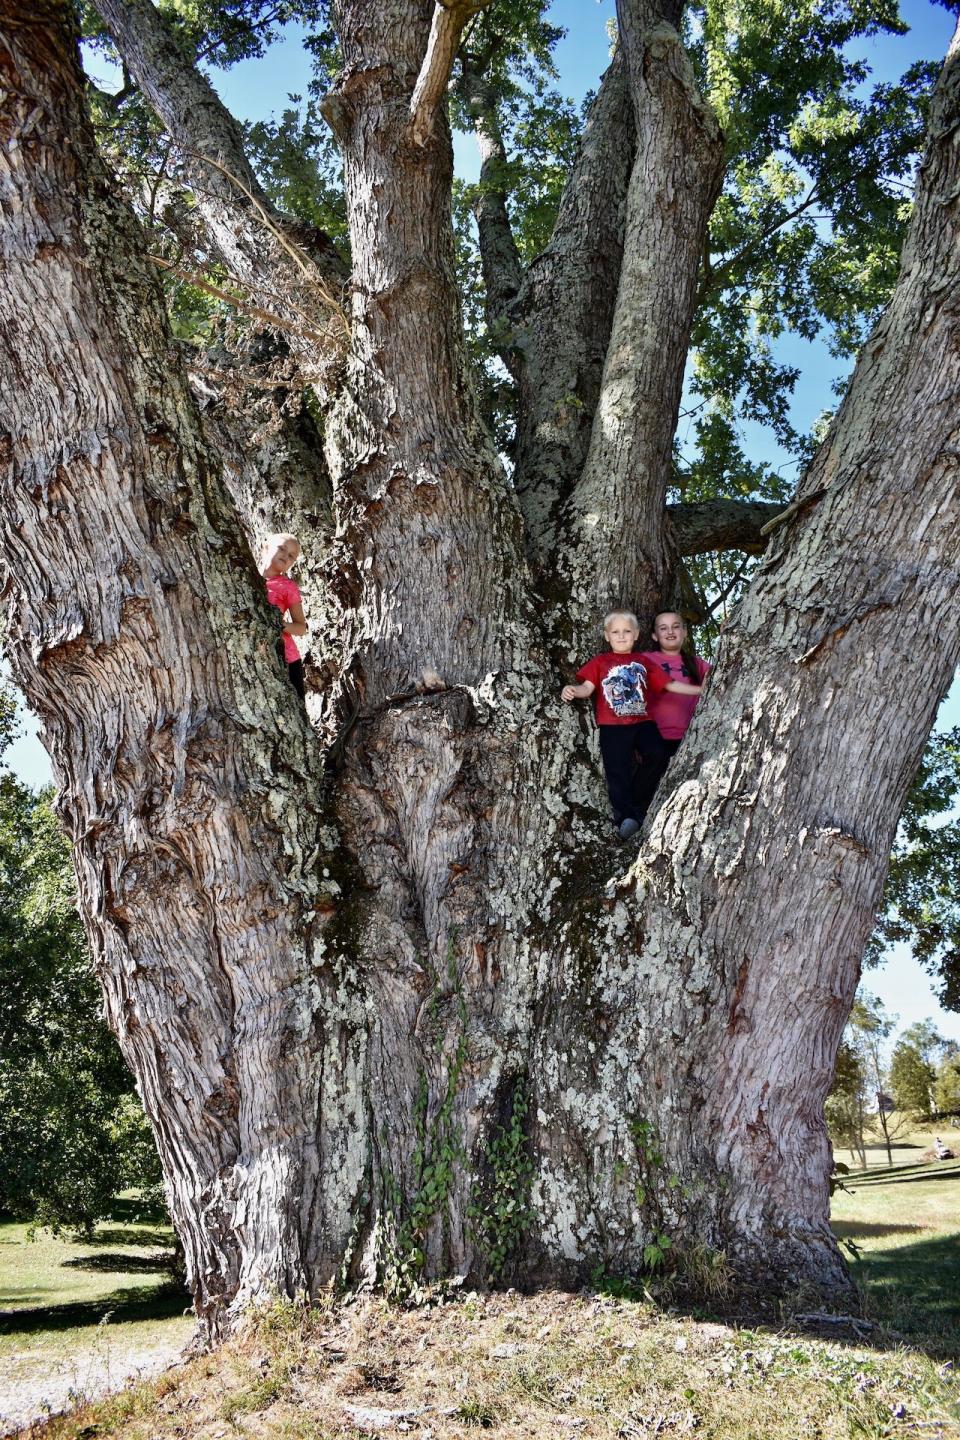 This state champion silver maple in Williams makes for a great climbing tree for the Brock children.